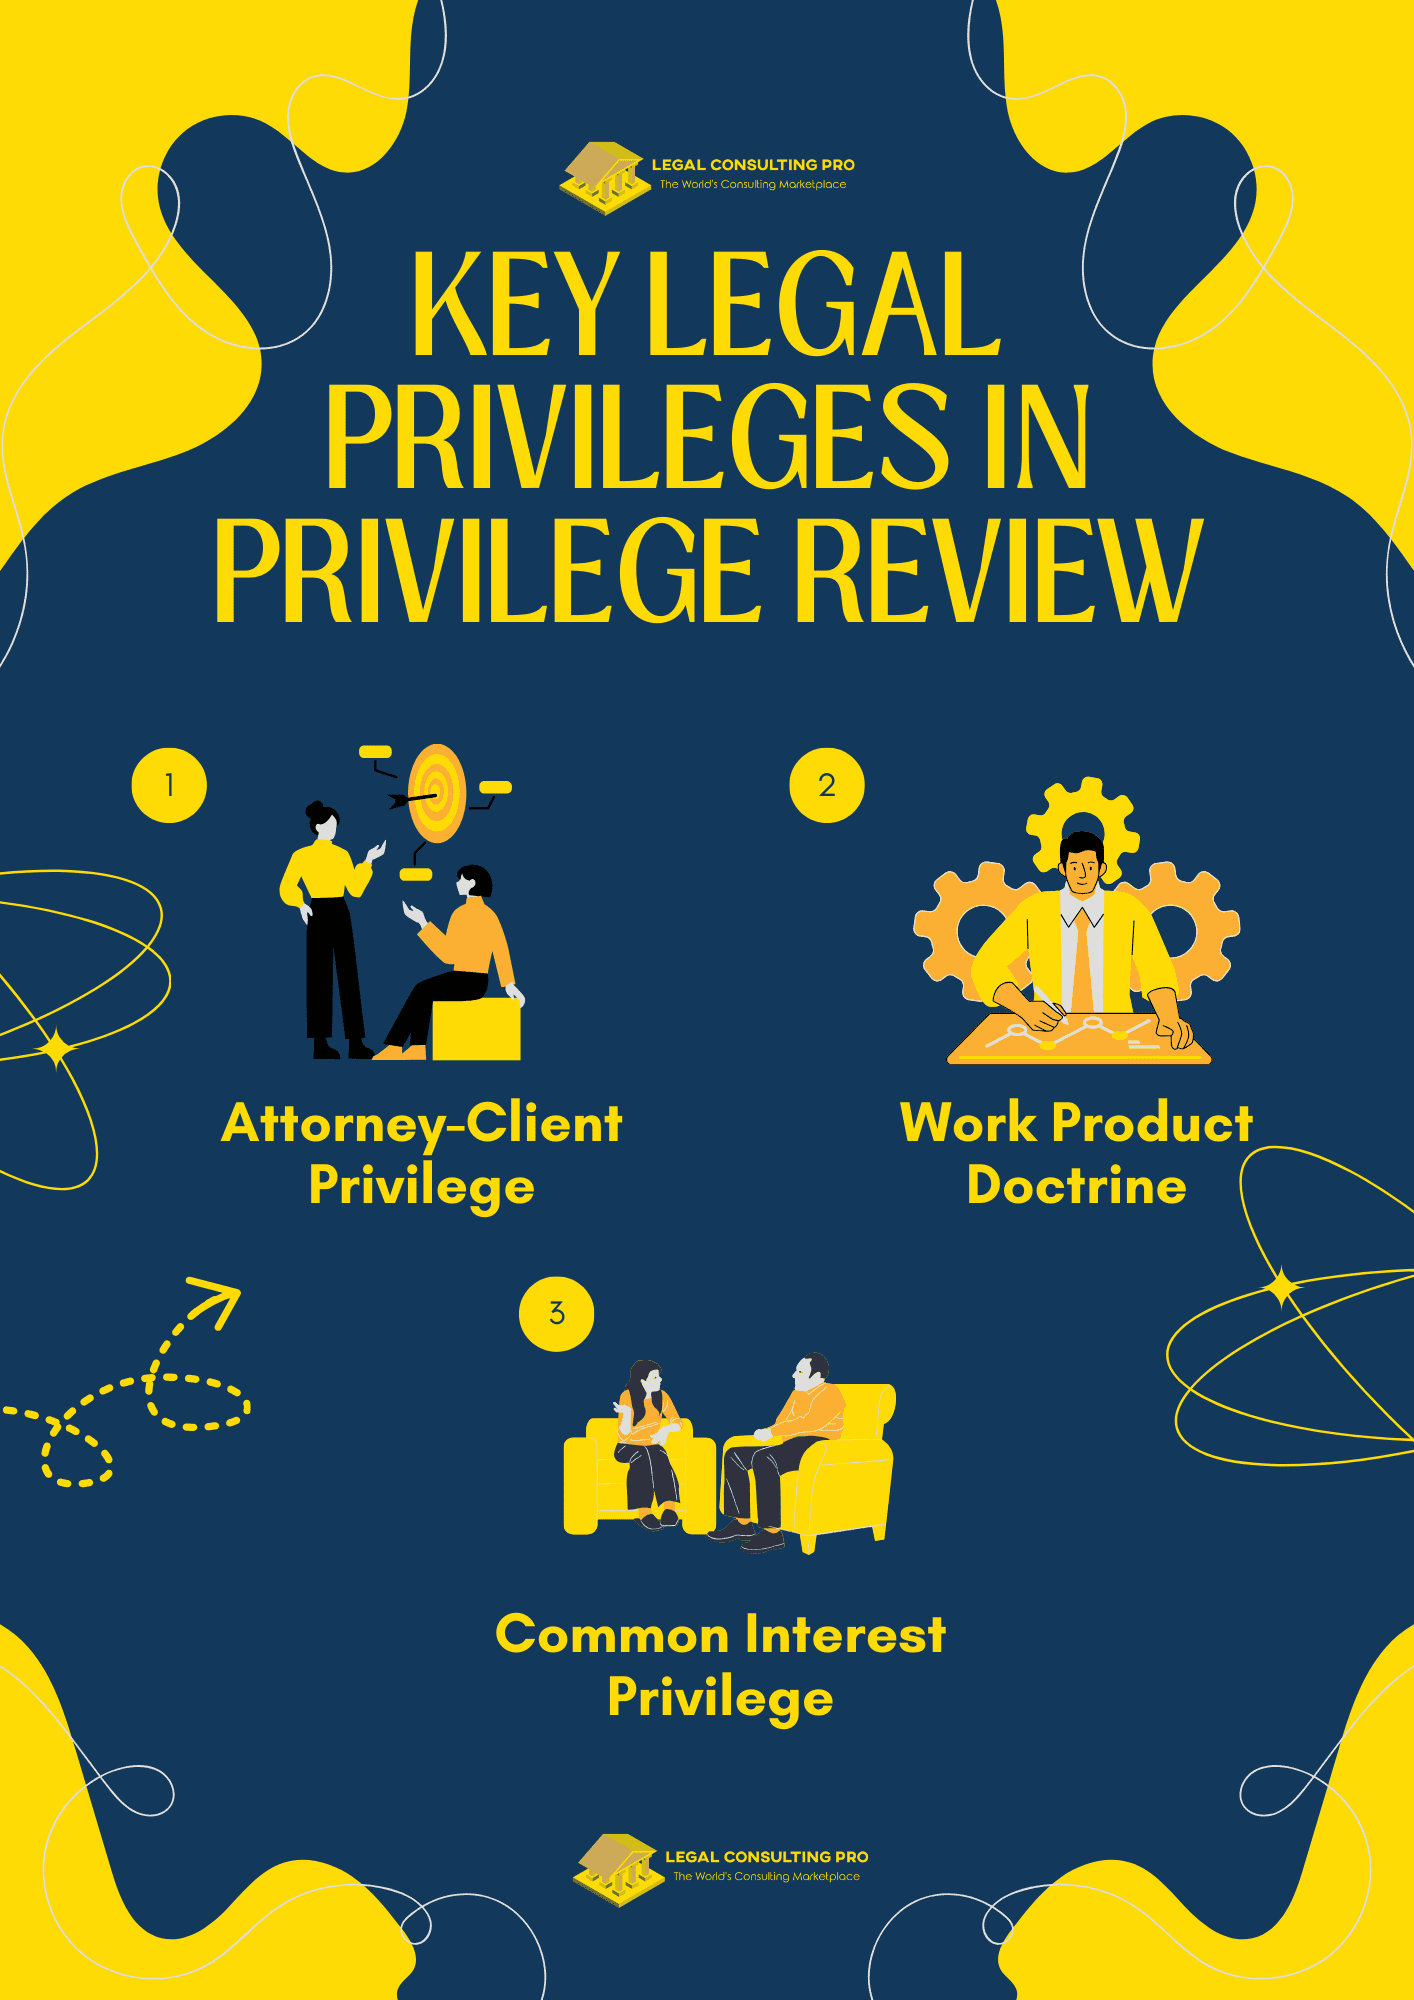 Key Legal Privileges in Privilege Review Infographic